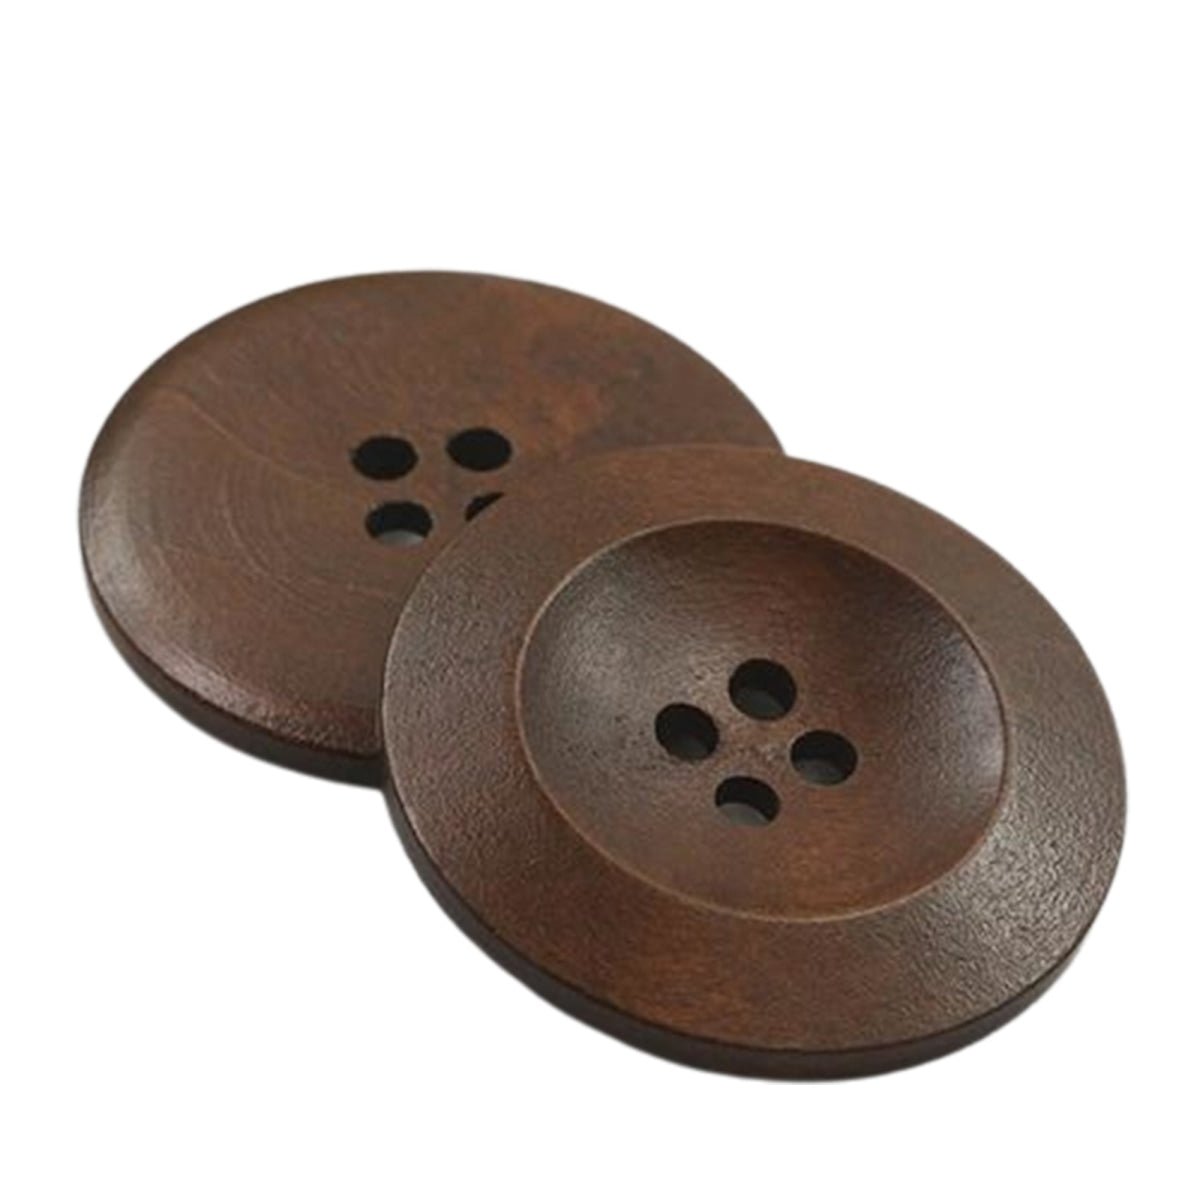 50pcs 15mm 20mm 25mm 30mm 35mm 4 Hole Wooden Buttons Sewing Round Wood Button For Clothes Coat Handmade - 15mm Dark Coffee - - Asia Sell